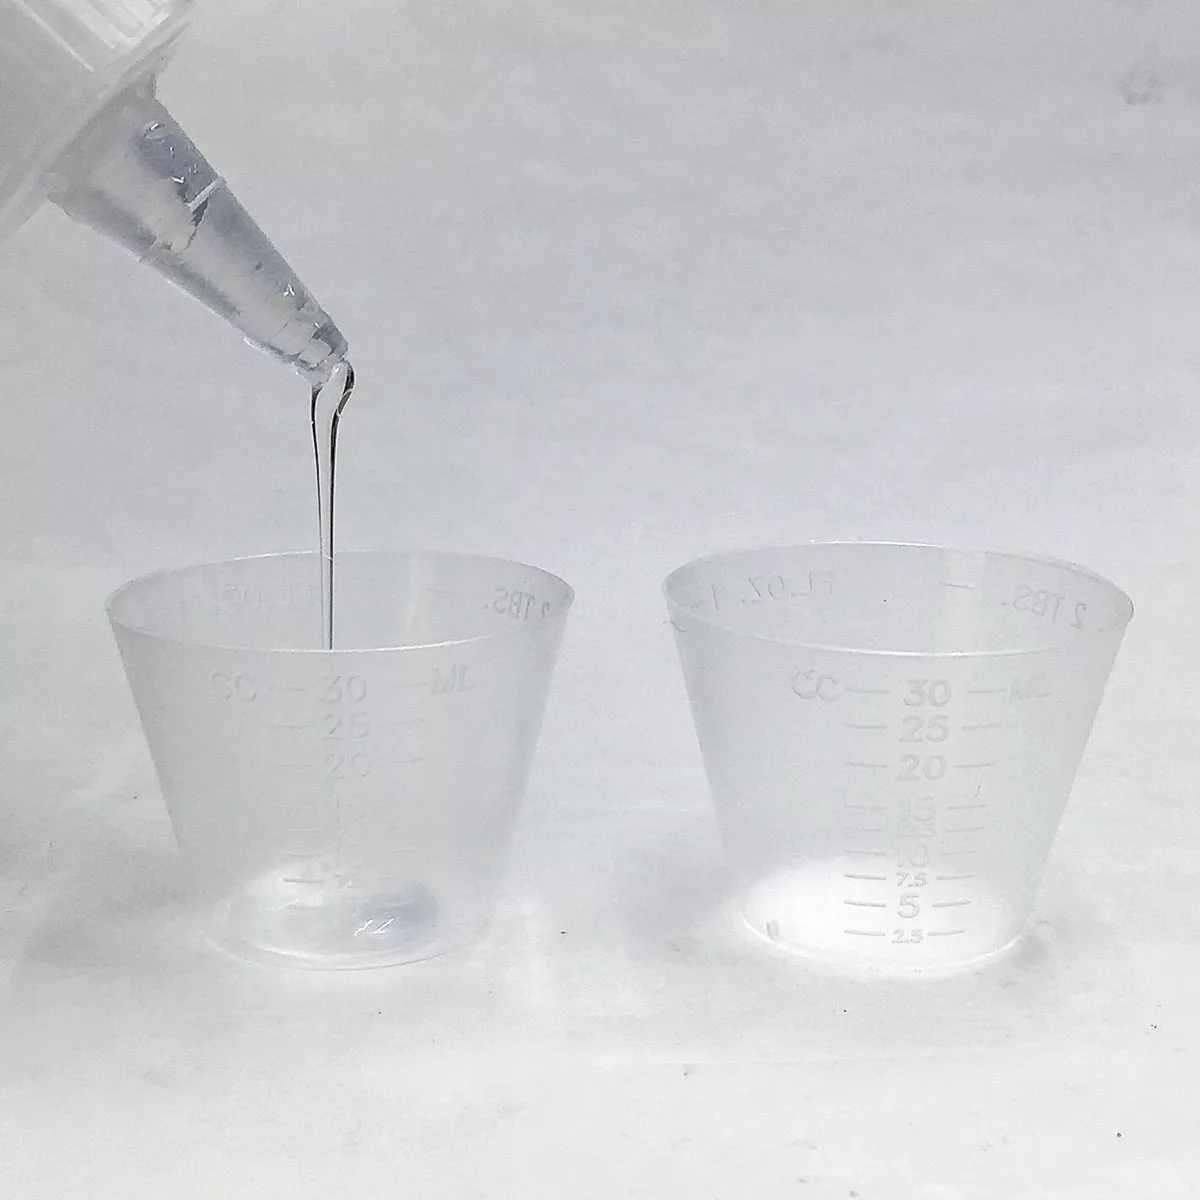 measuring epoxy resin and hardener into graduated resin mixing cups